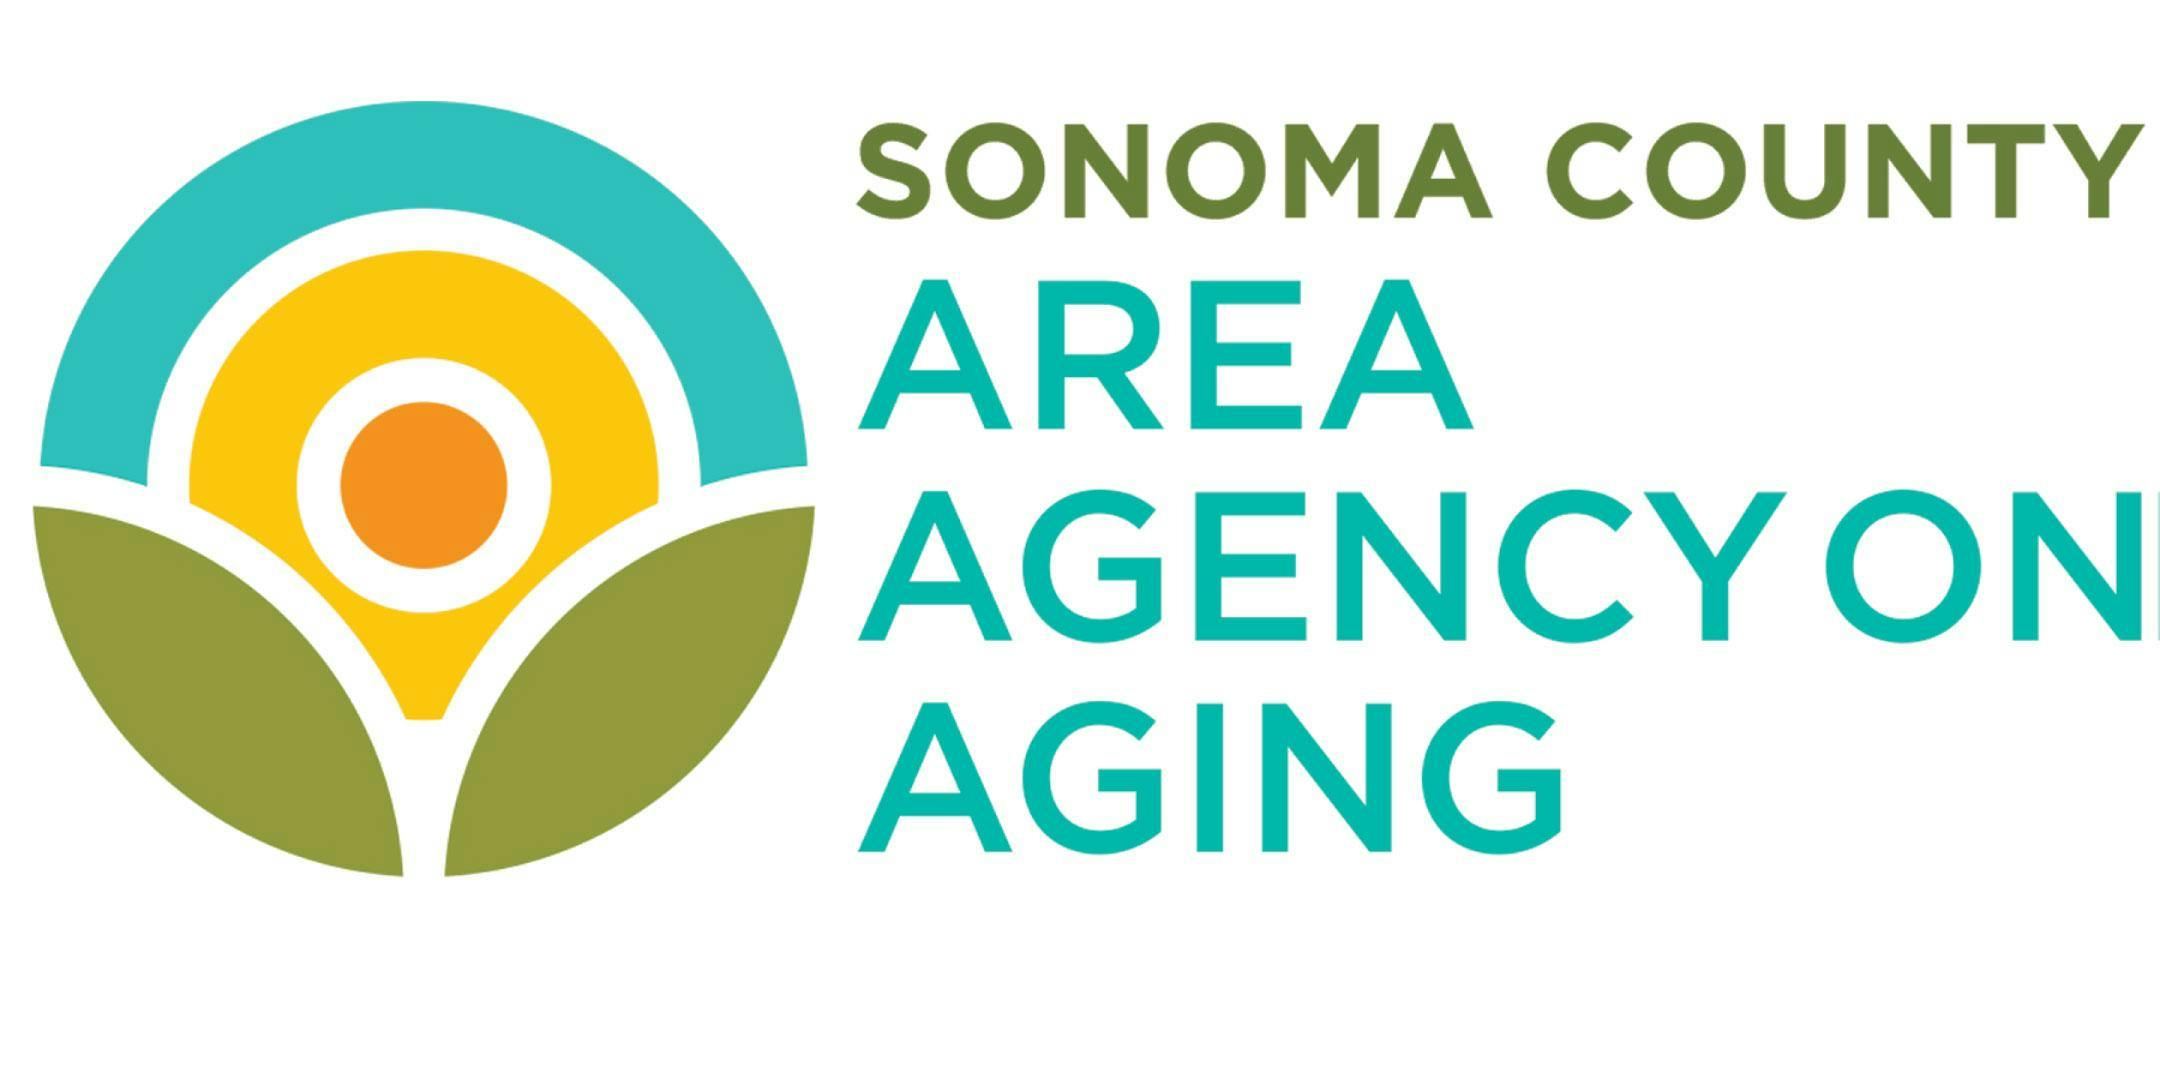 Sonoma County Residents, We Want to Hear From You! LGBTQ+ Focus Group